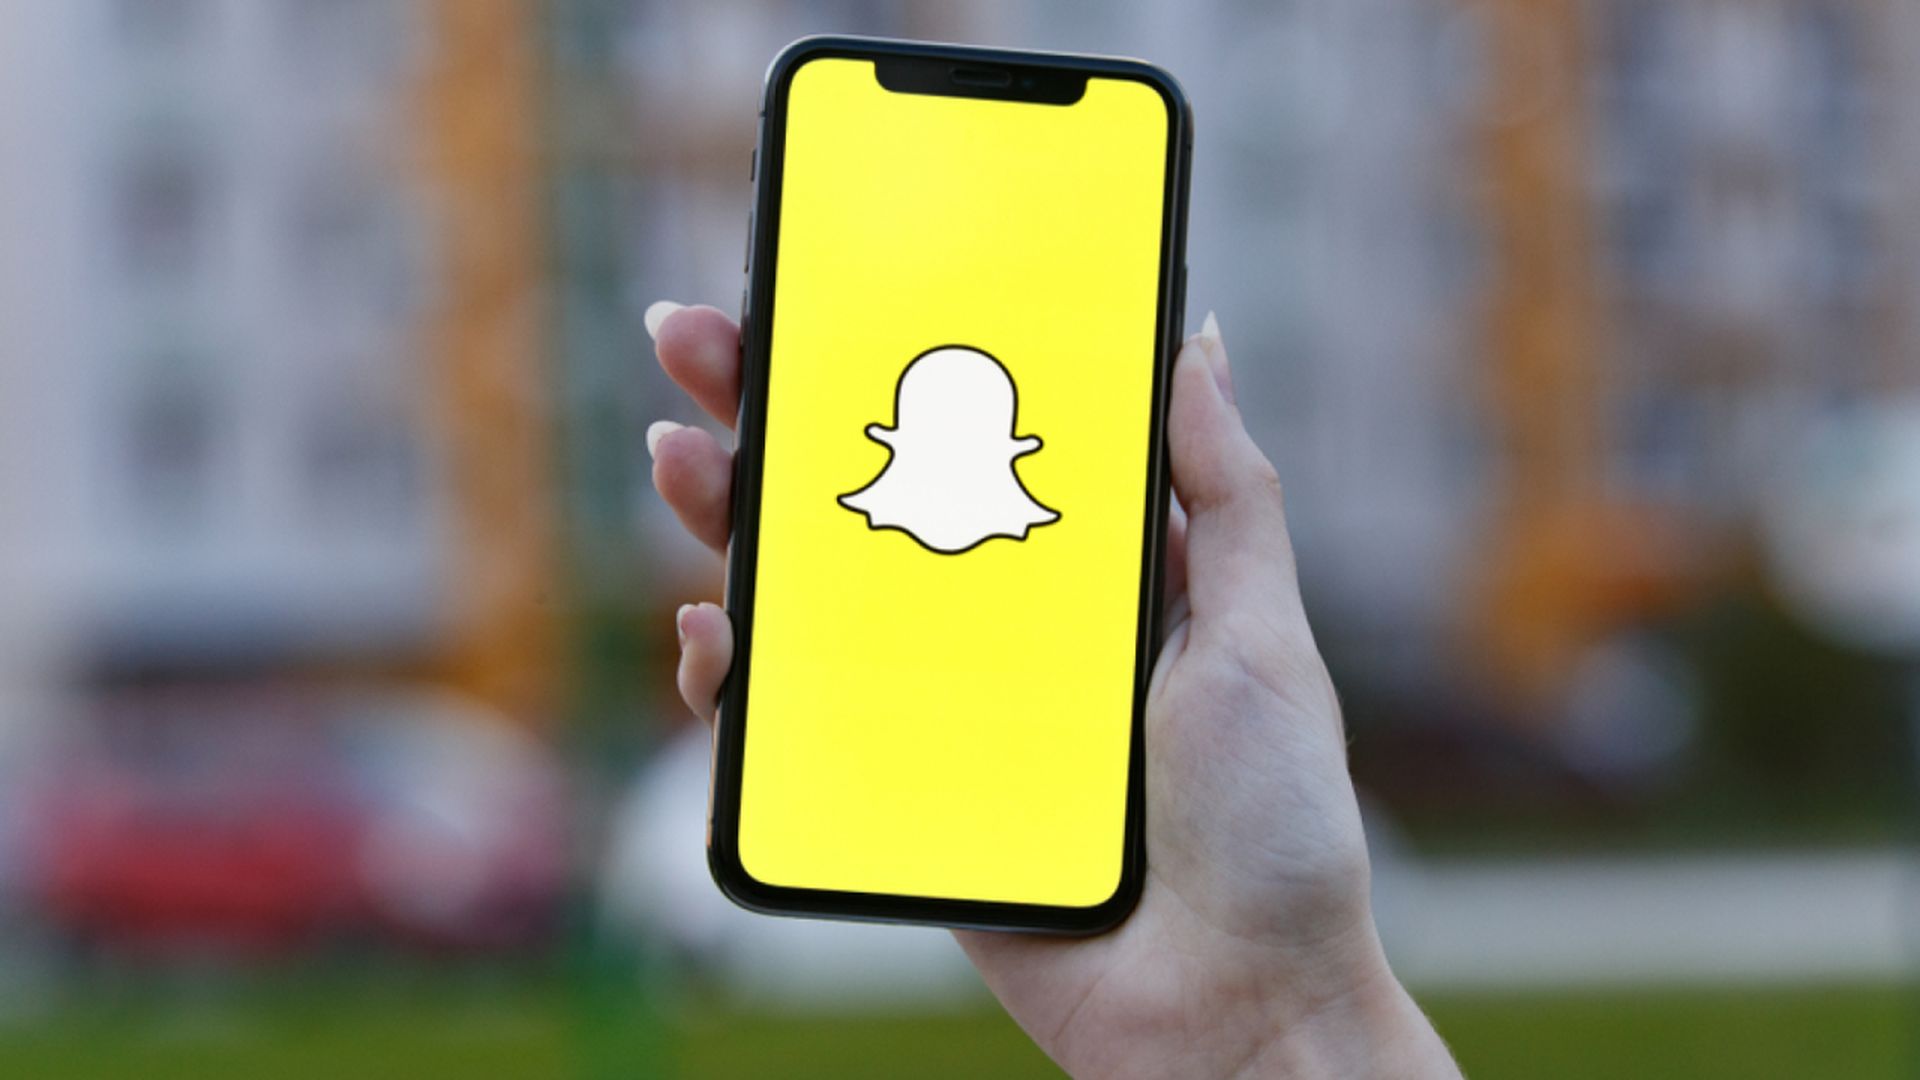 In this article, we are going to be covering how to use Snapchat dual camera feature, so you can try out this new and fun way to take Snaps.